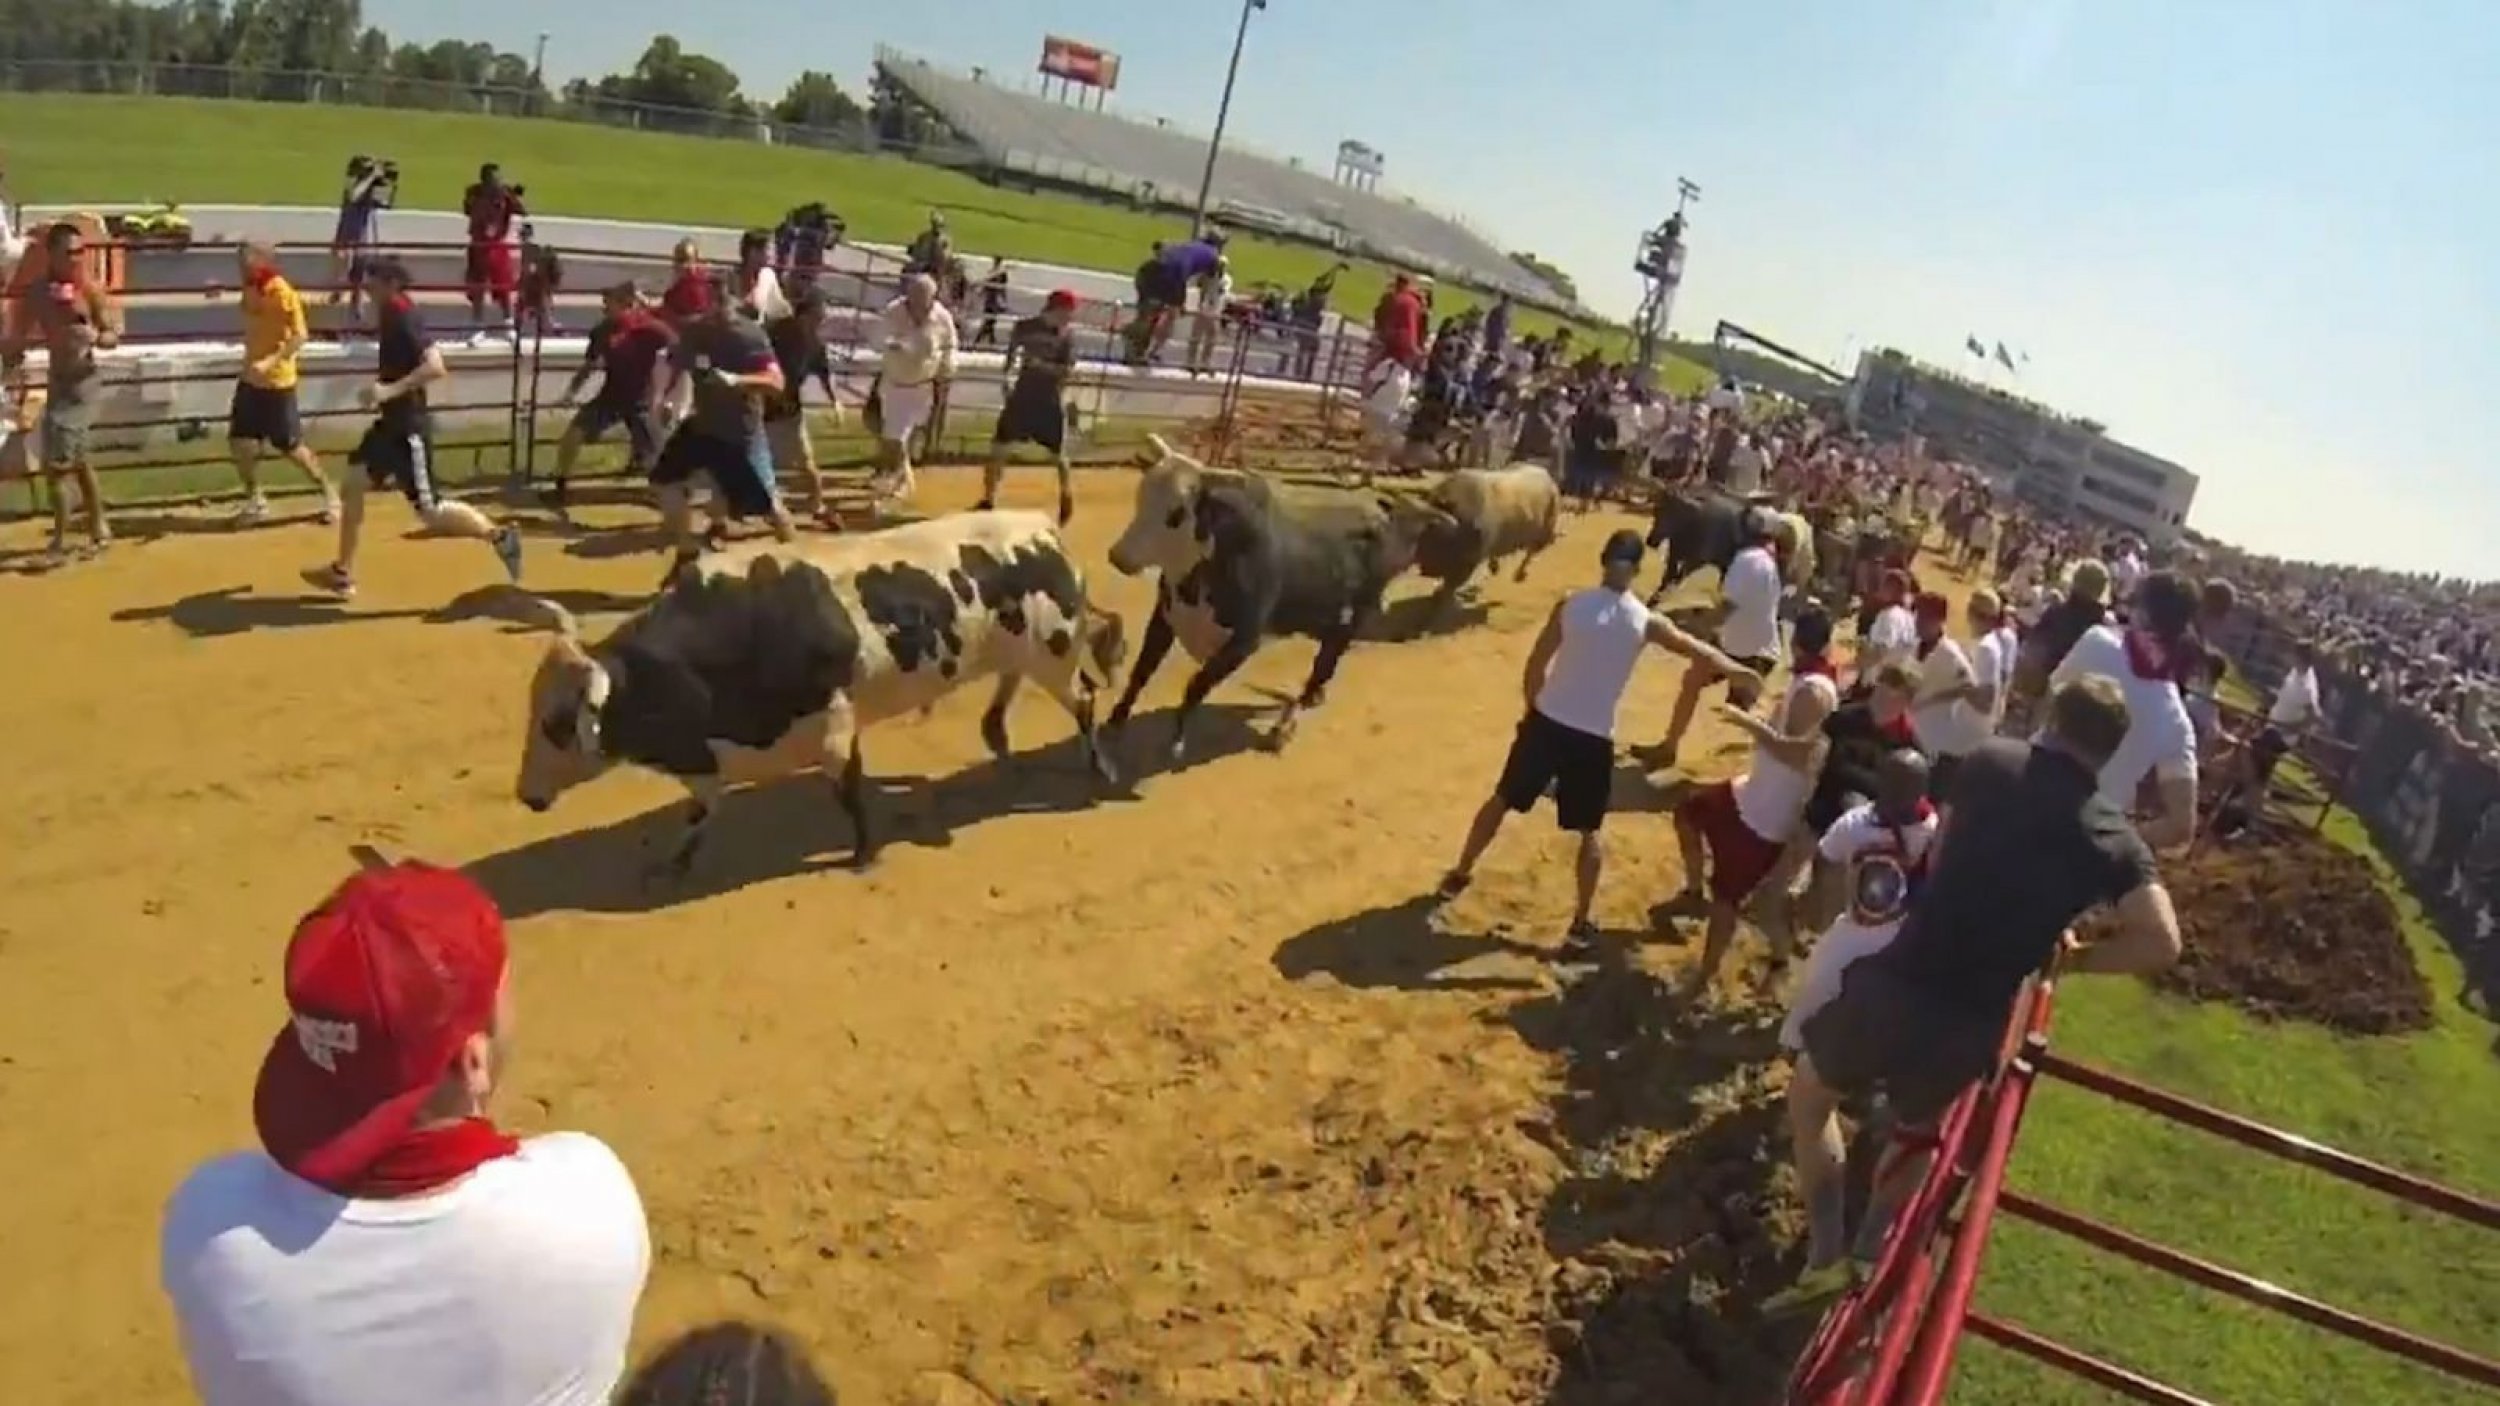 Raw Video The Great Bull Run Brings Running With The Bulls To America